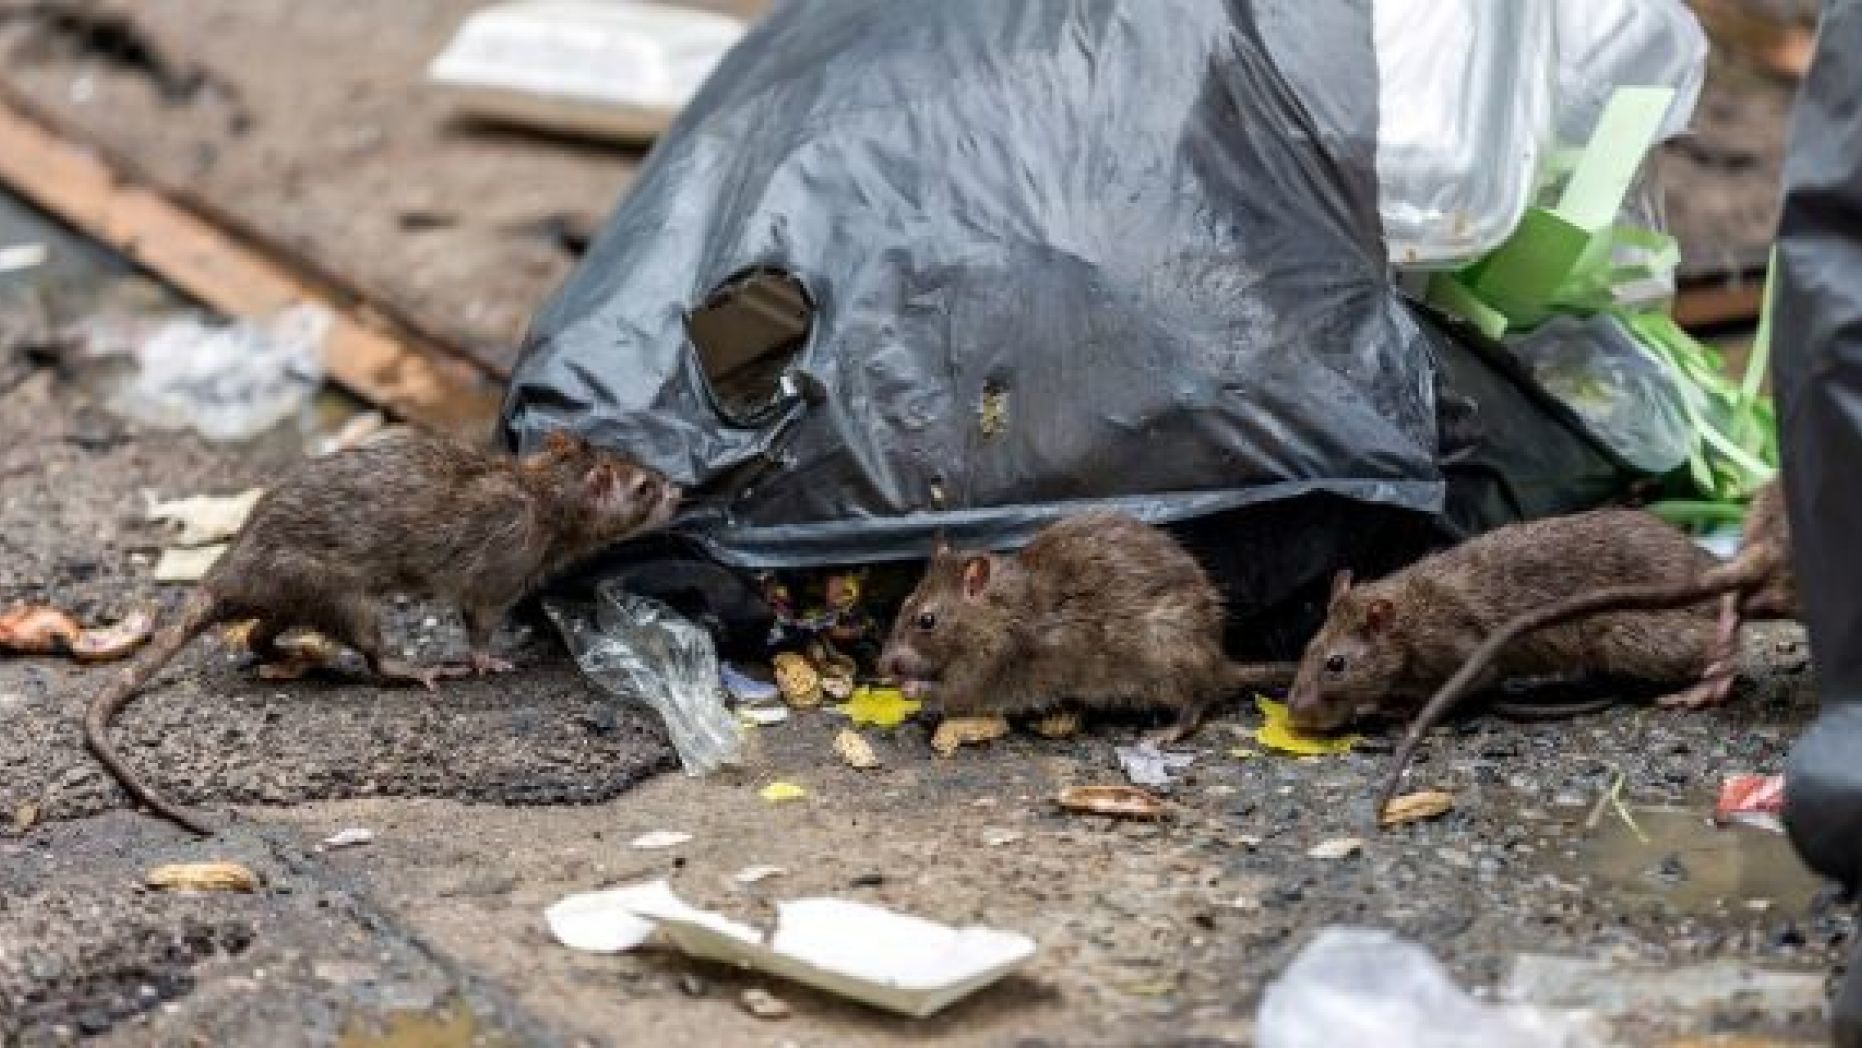 There is no treatment, cure or vaccine for hantavirus infection, and the case-fatality rate can reach 35-50 percent.<br data-cke-eol="1">